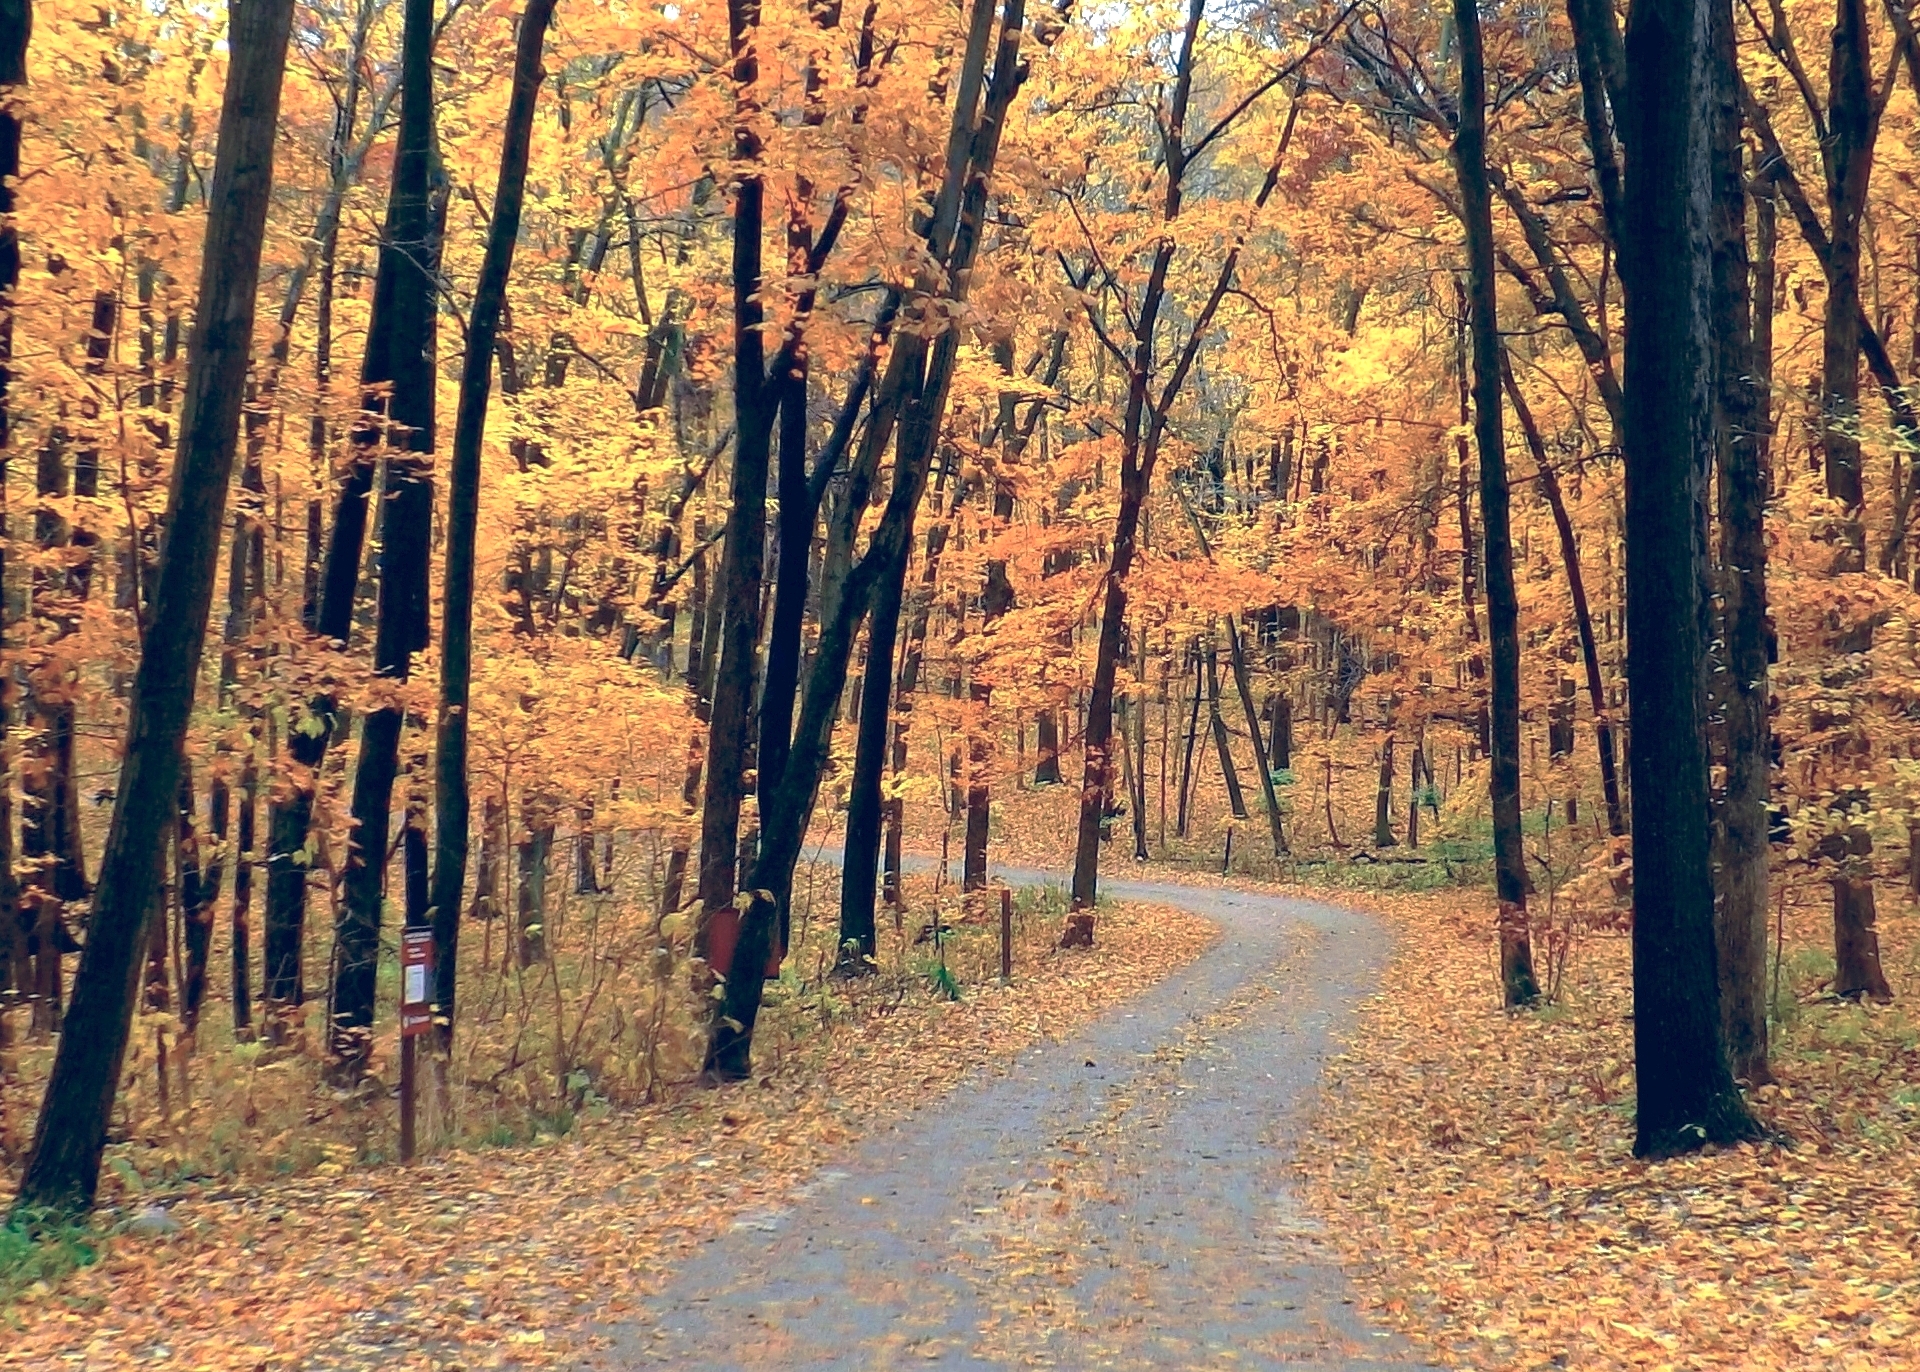 a dirt road surrounded by trees in autumn